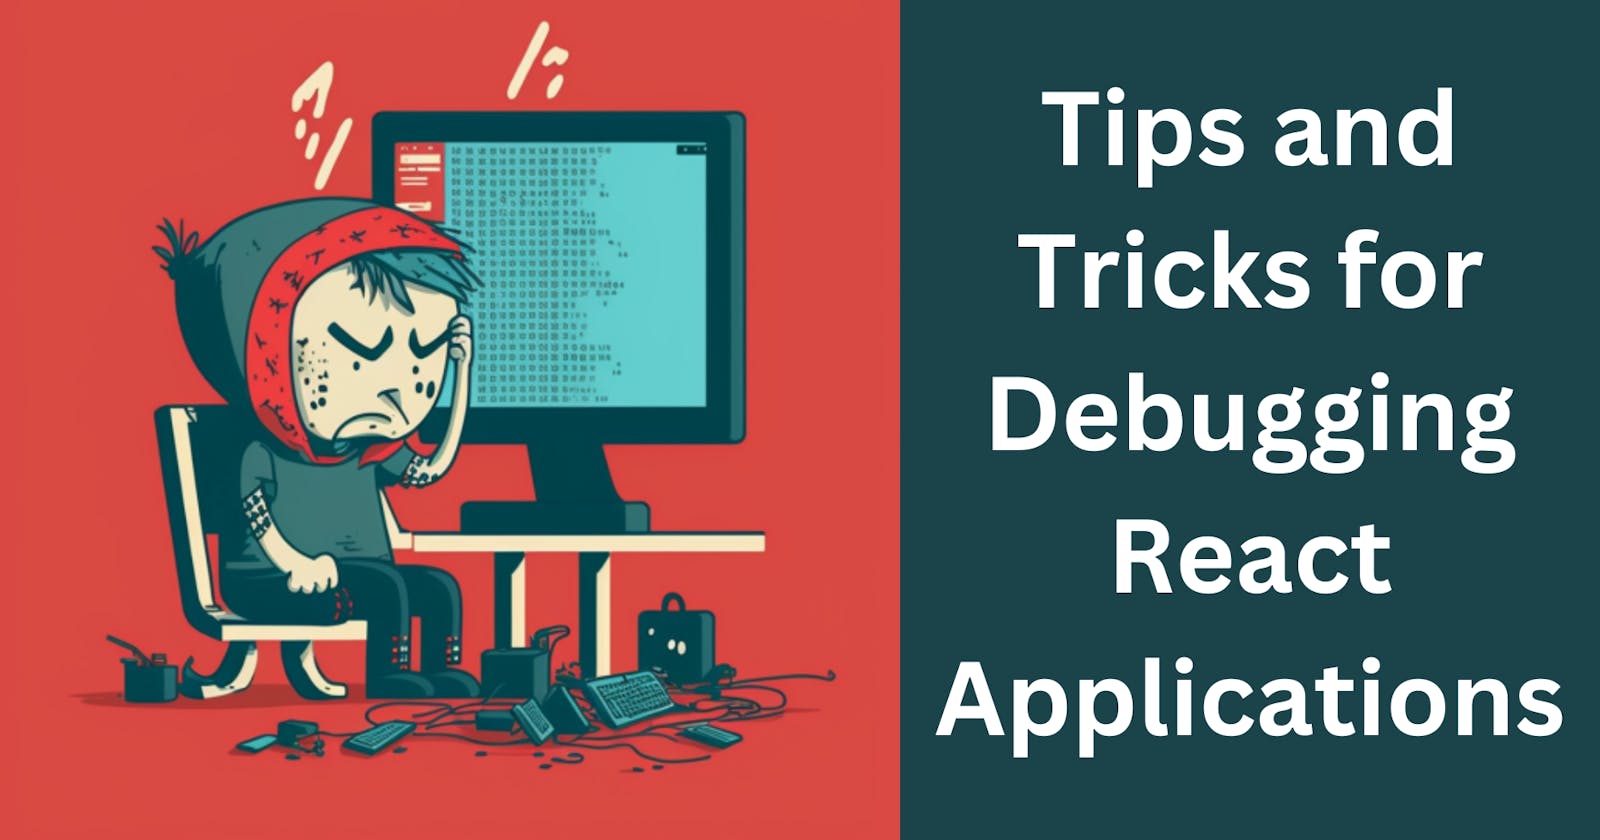 Tips and Tricks for Debugging React Applications